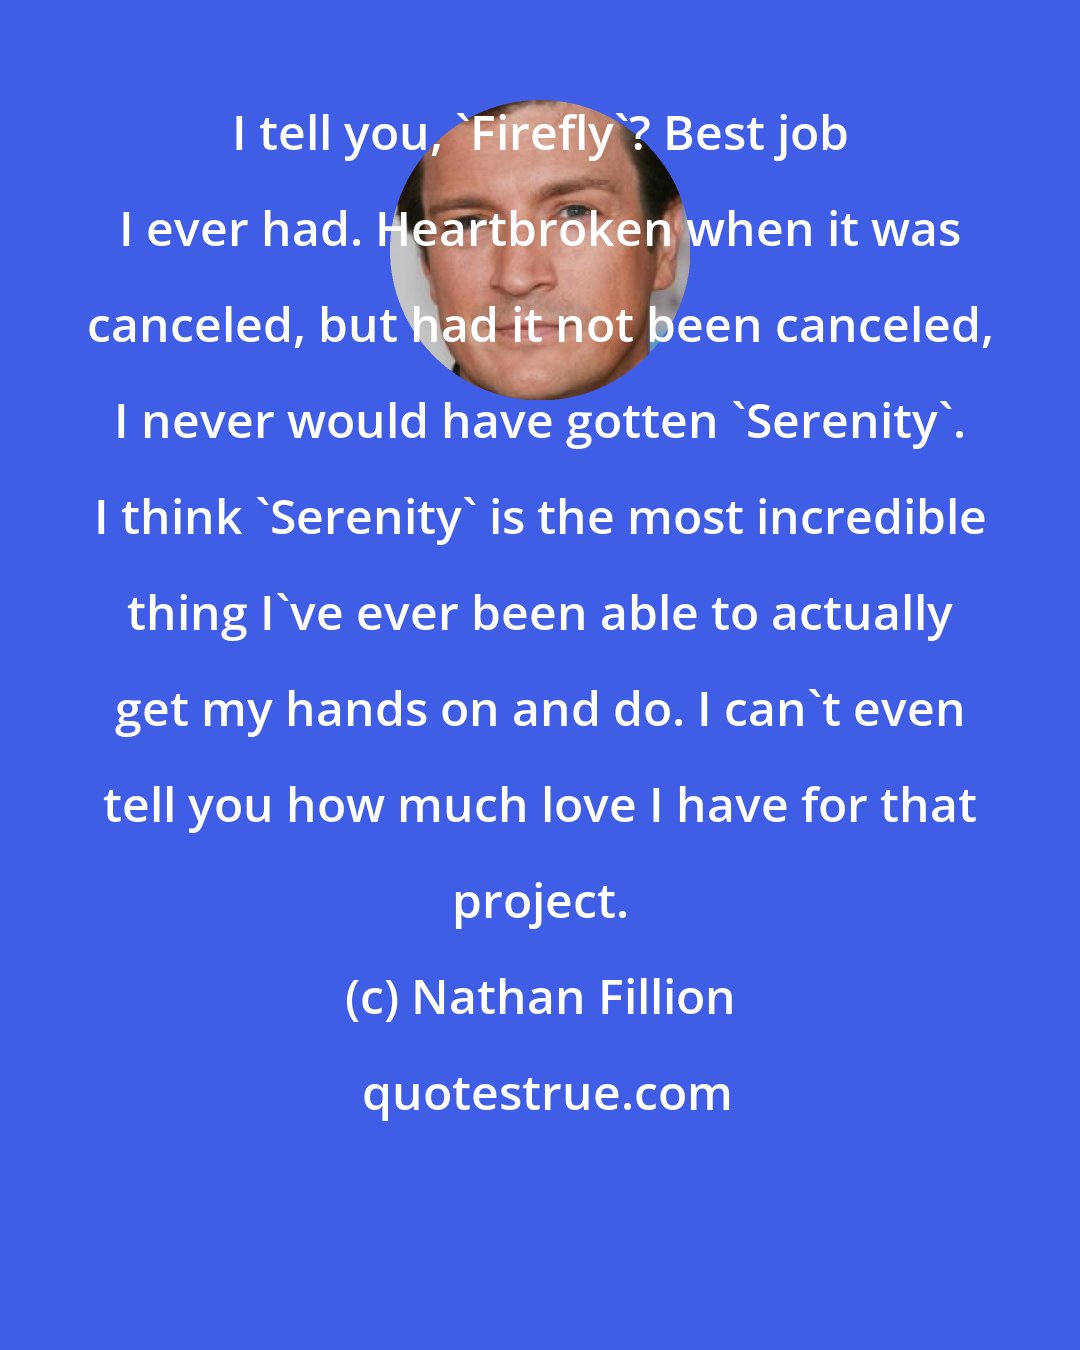 Nathan Fillion: I tell you, 'Firefly'? Best job I ever had. Heartbroken when it was canceled, but had it not been canceled, I never would have gotten 'Serenity'. I think 'Serenity' is the most incredible thing I've ever been able to actually get my hands on and do. I can't even tell you how much love I have for that project.